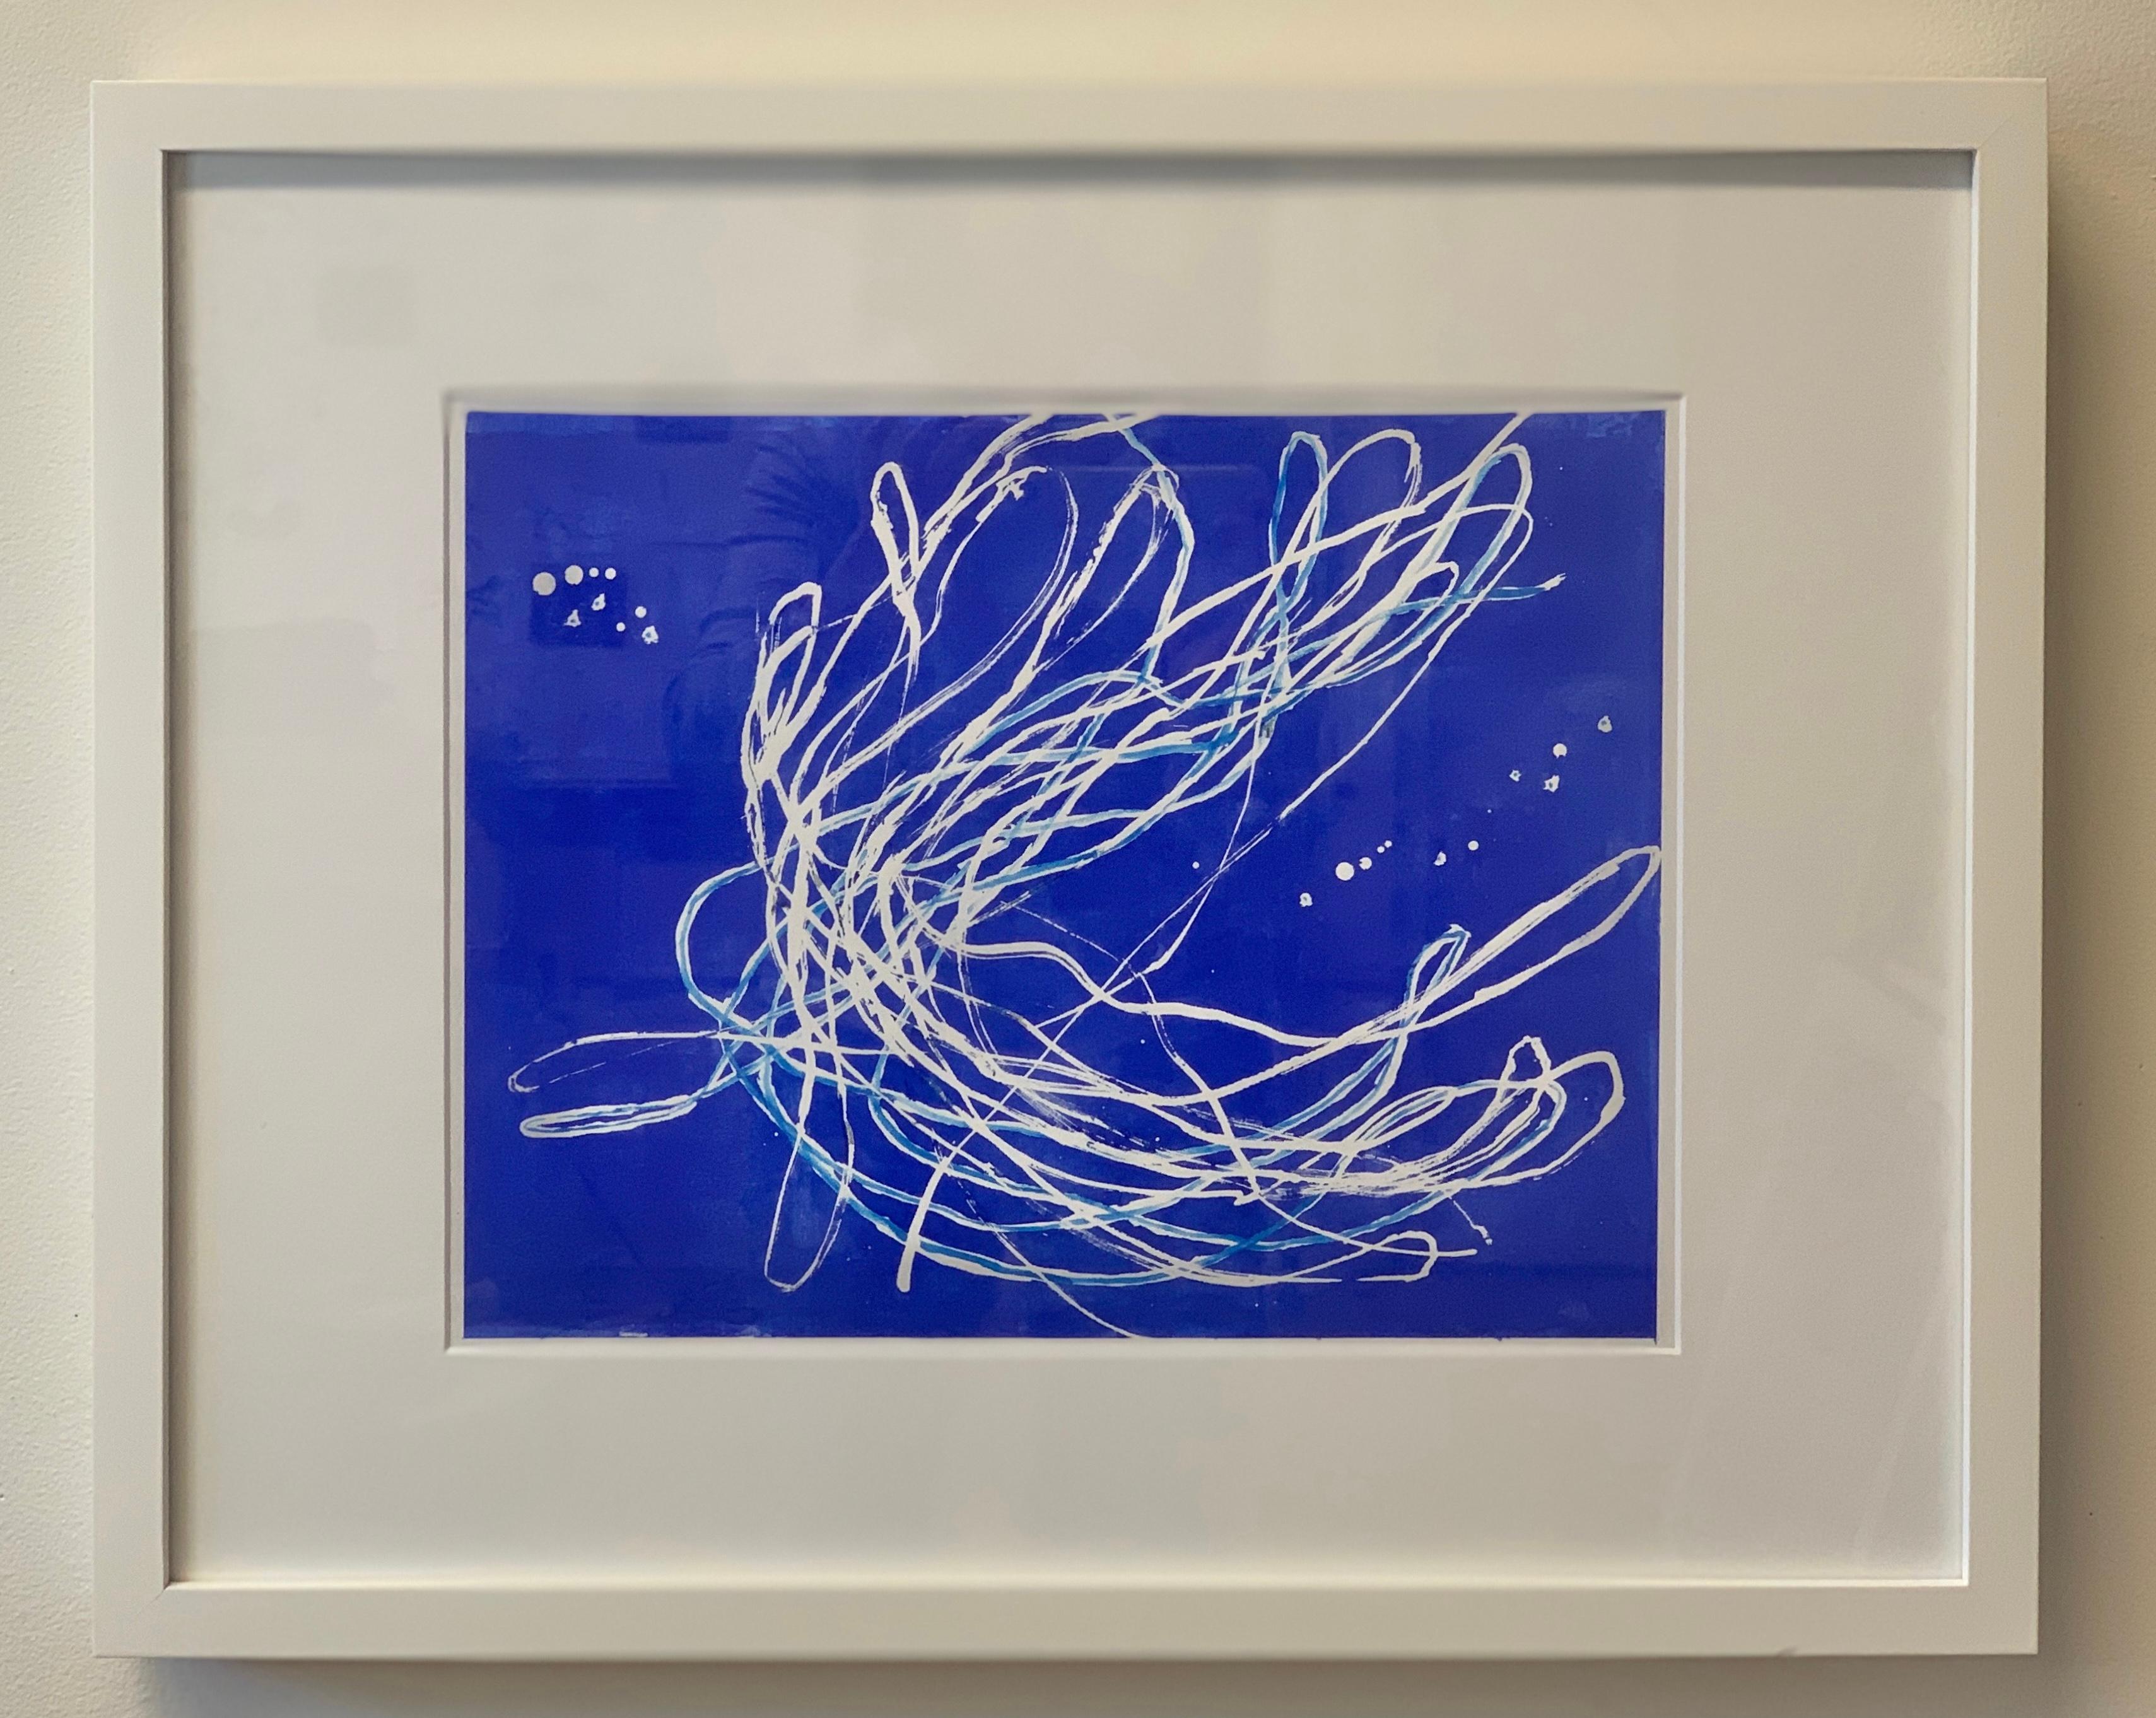 Reef Dancer: contemporary abstract gestural sea painting on blue w/ white lines - Abstract Expressionist Art by Paula Cahill